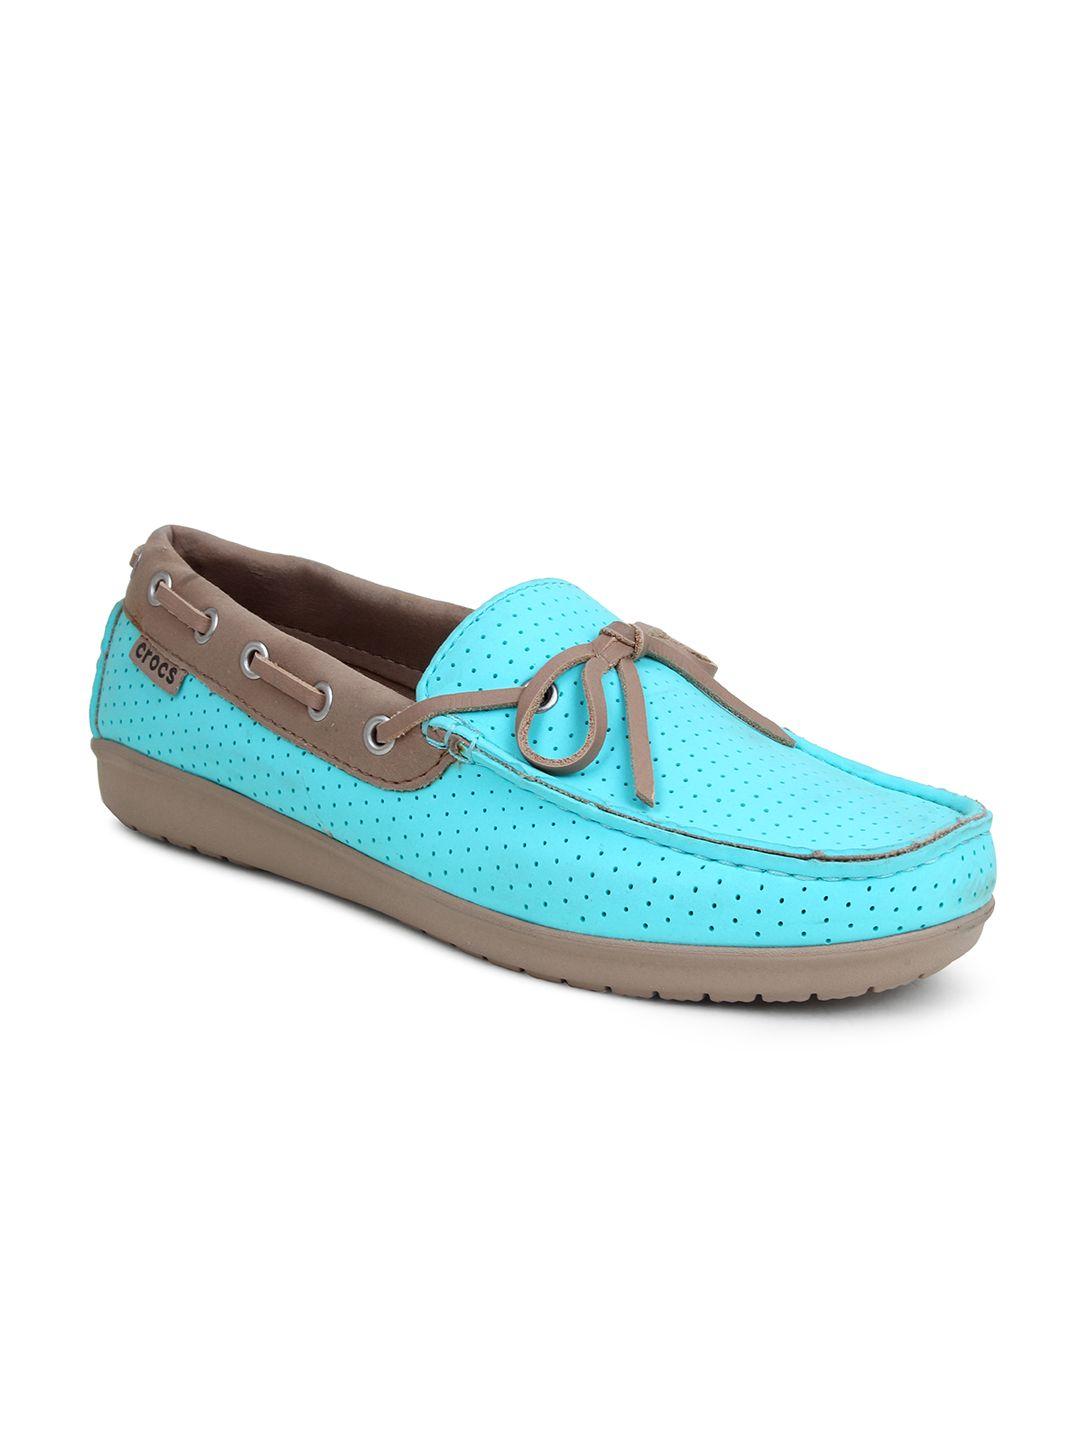 crocs women blue perforated loafers